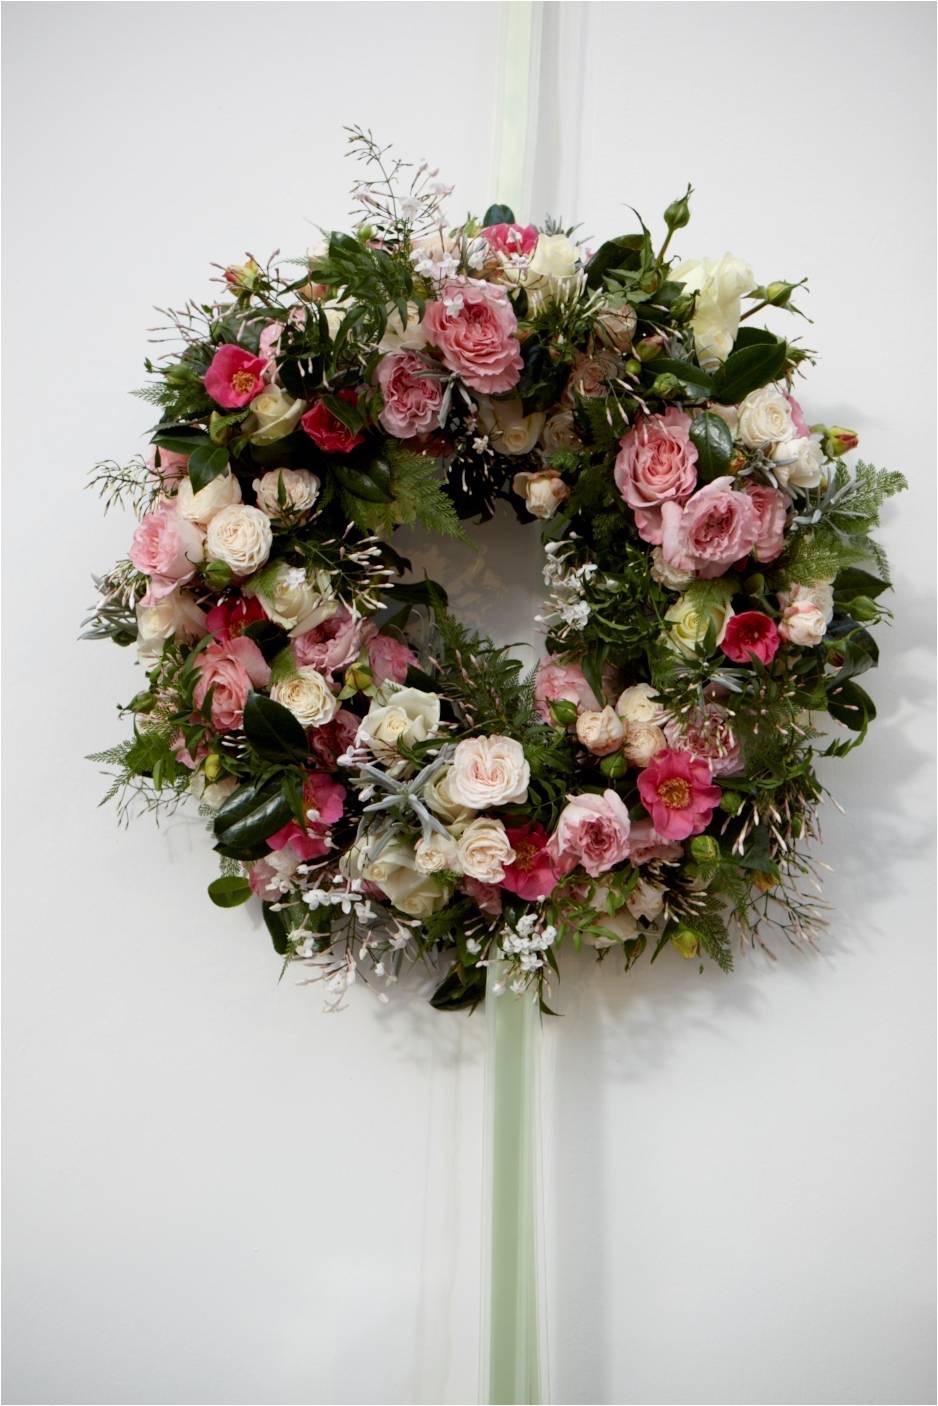 Wreath pinks and green (nws2010).jpg